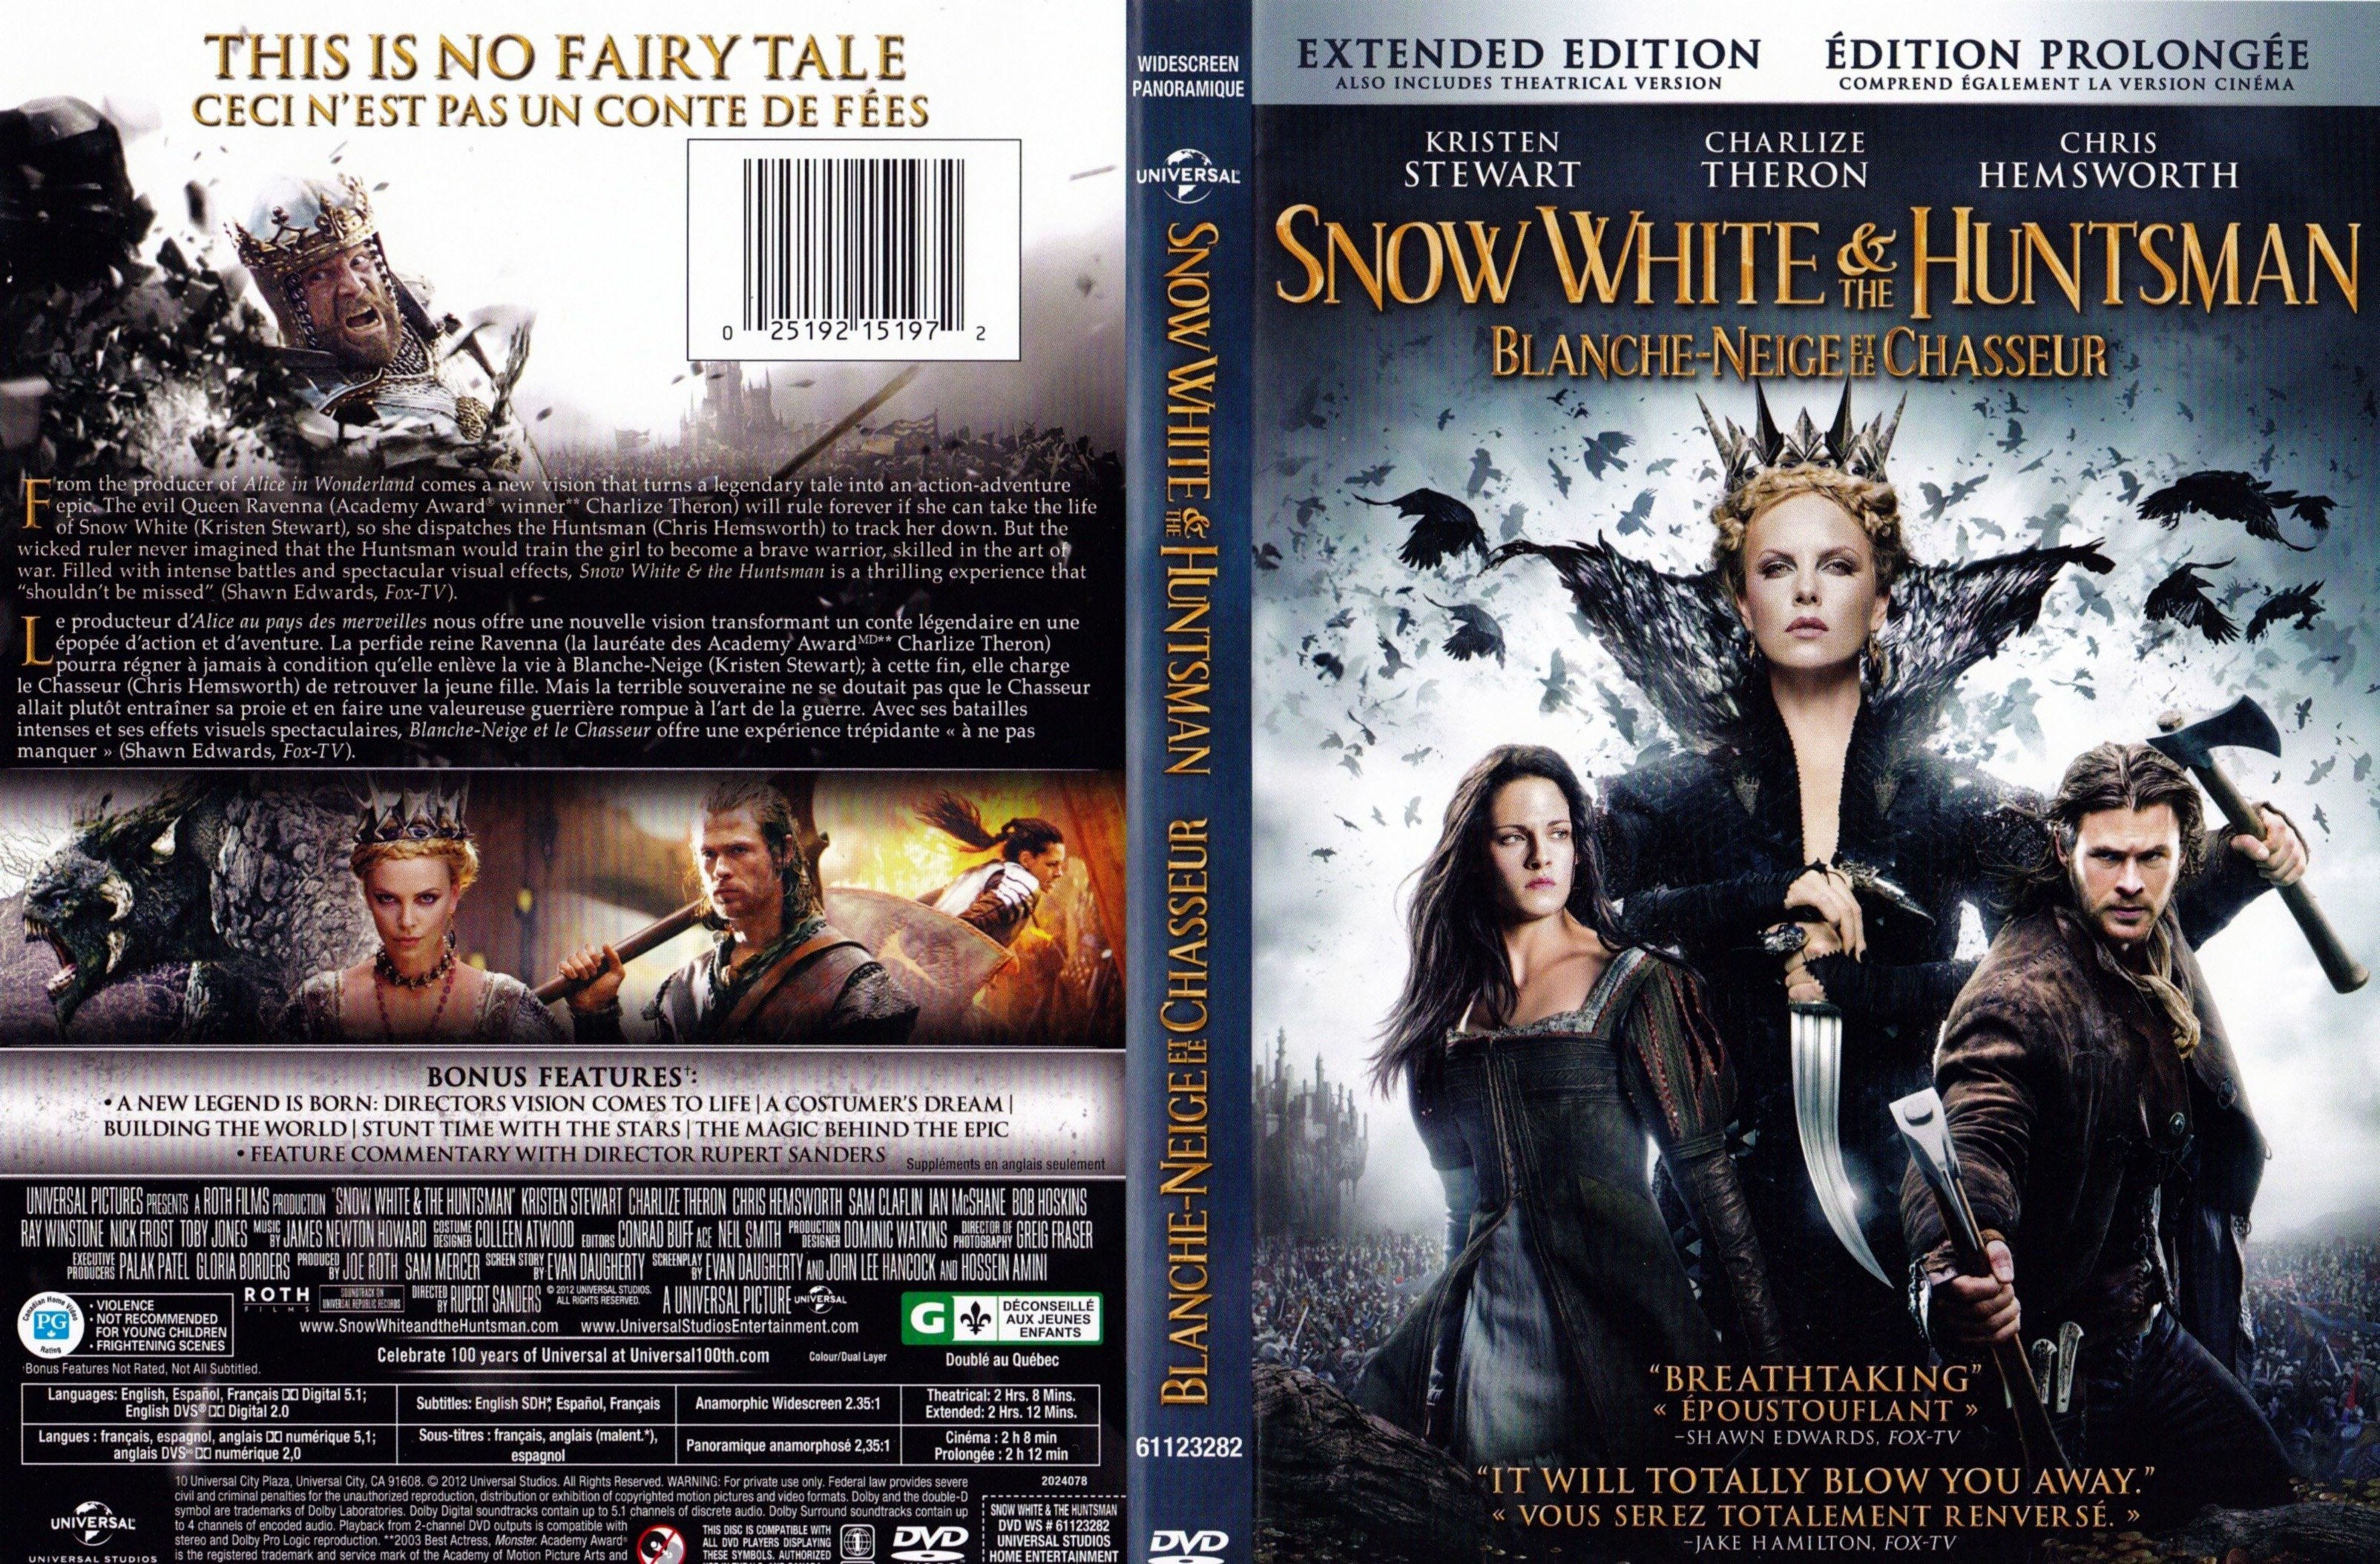 Jaquette DVD Snow white and the huntman - Blanche neige et le chasseur (Canadienne)